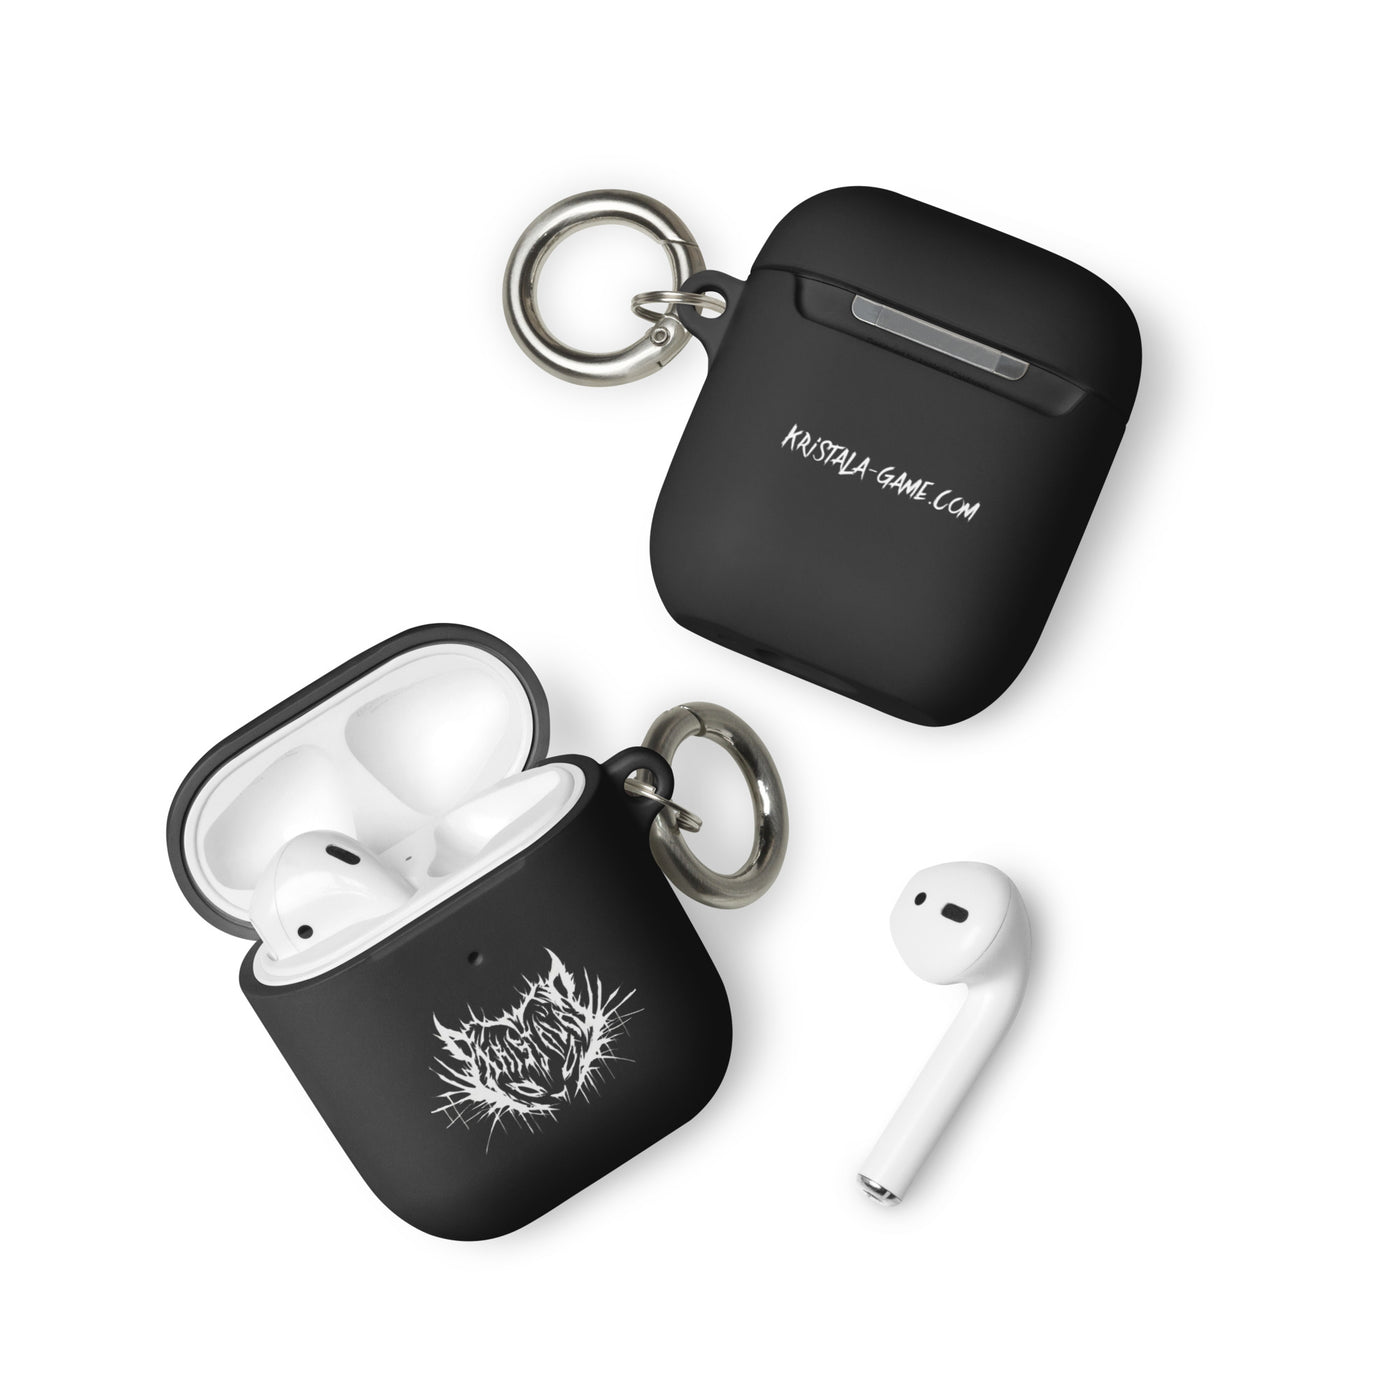 two sleek matte black airpods case open front and back with kristala x metal voices white cat logo and silver keychain attachment white background